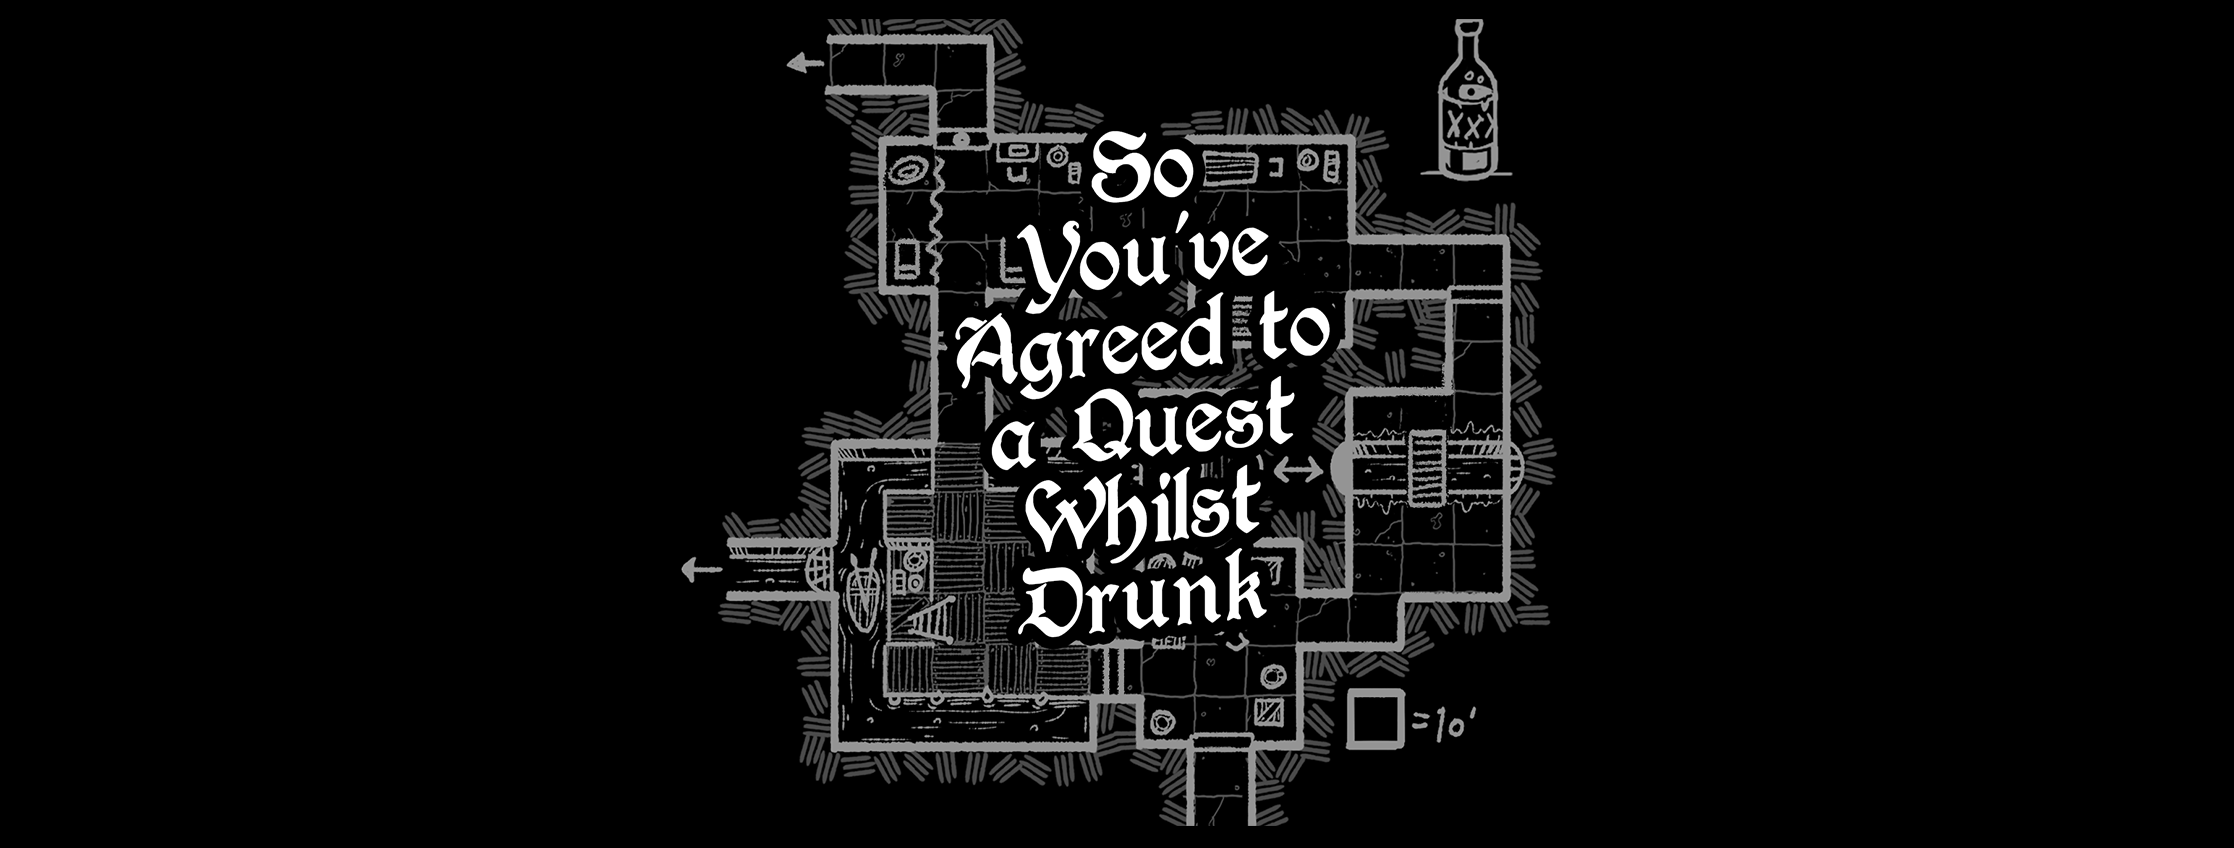 So You've Agreed To a Quest Whilst Drunk